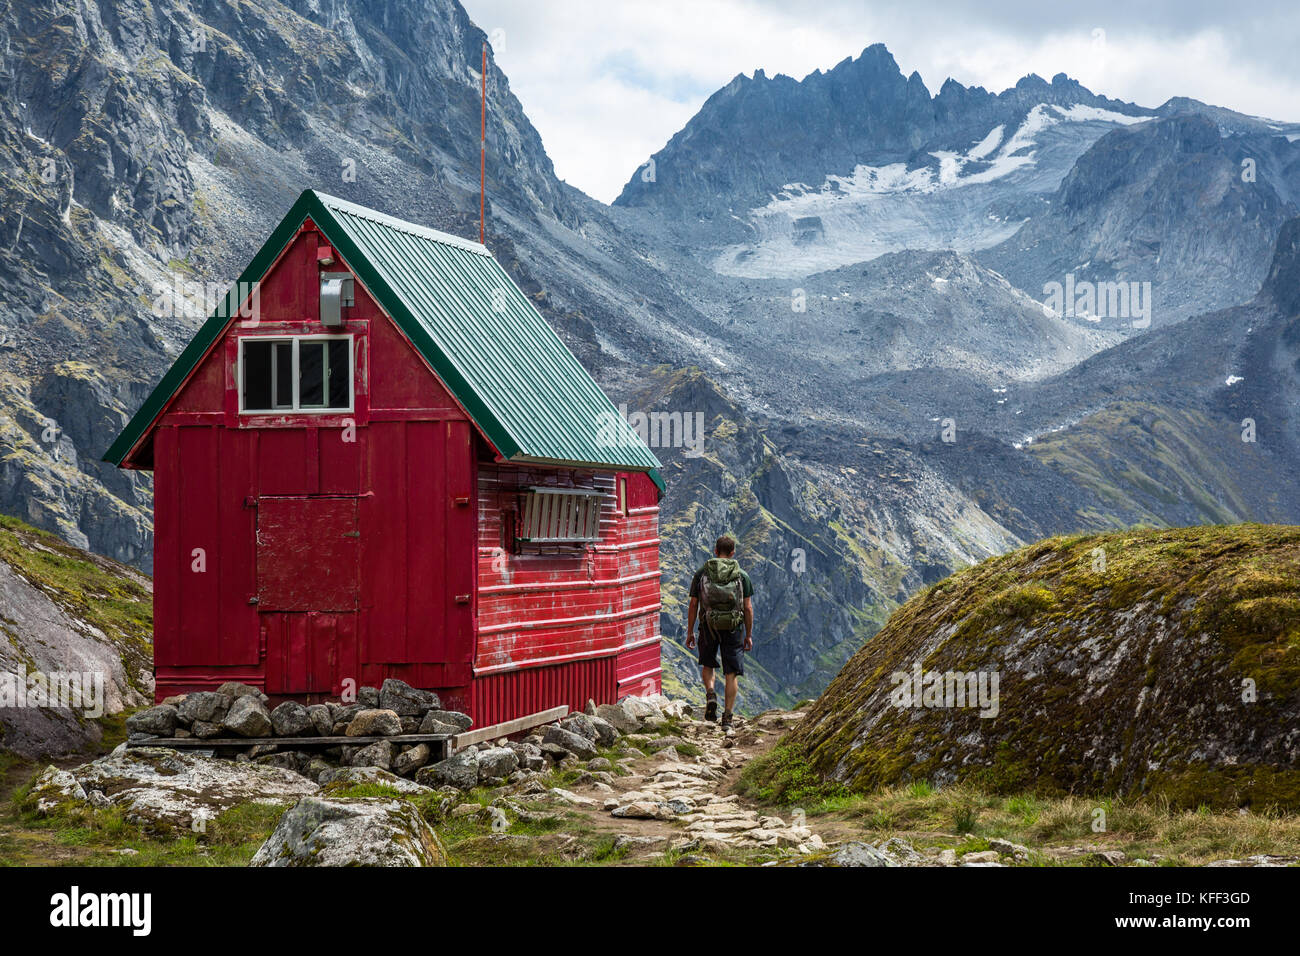 A man with a backpack out hiking walks up the trail to a red and green wilderness hut deep in the Talkeetna Mountains near Hatcher Pass, Alaska Stock Photo